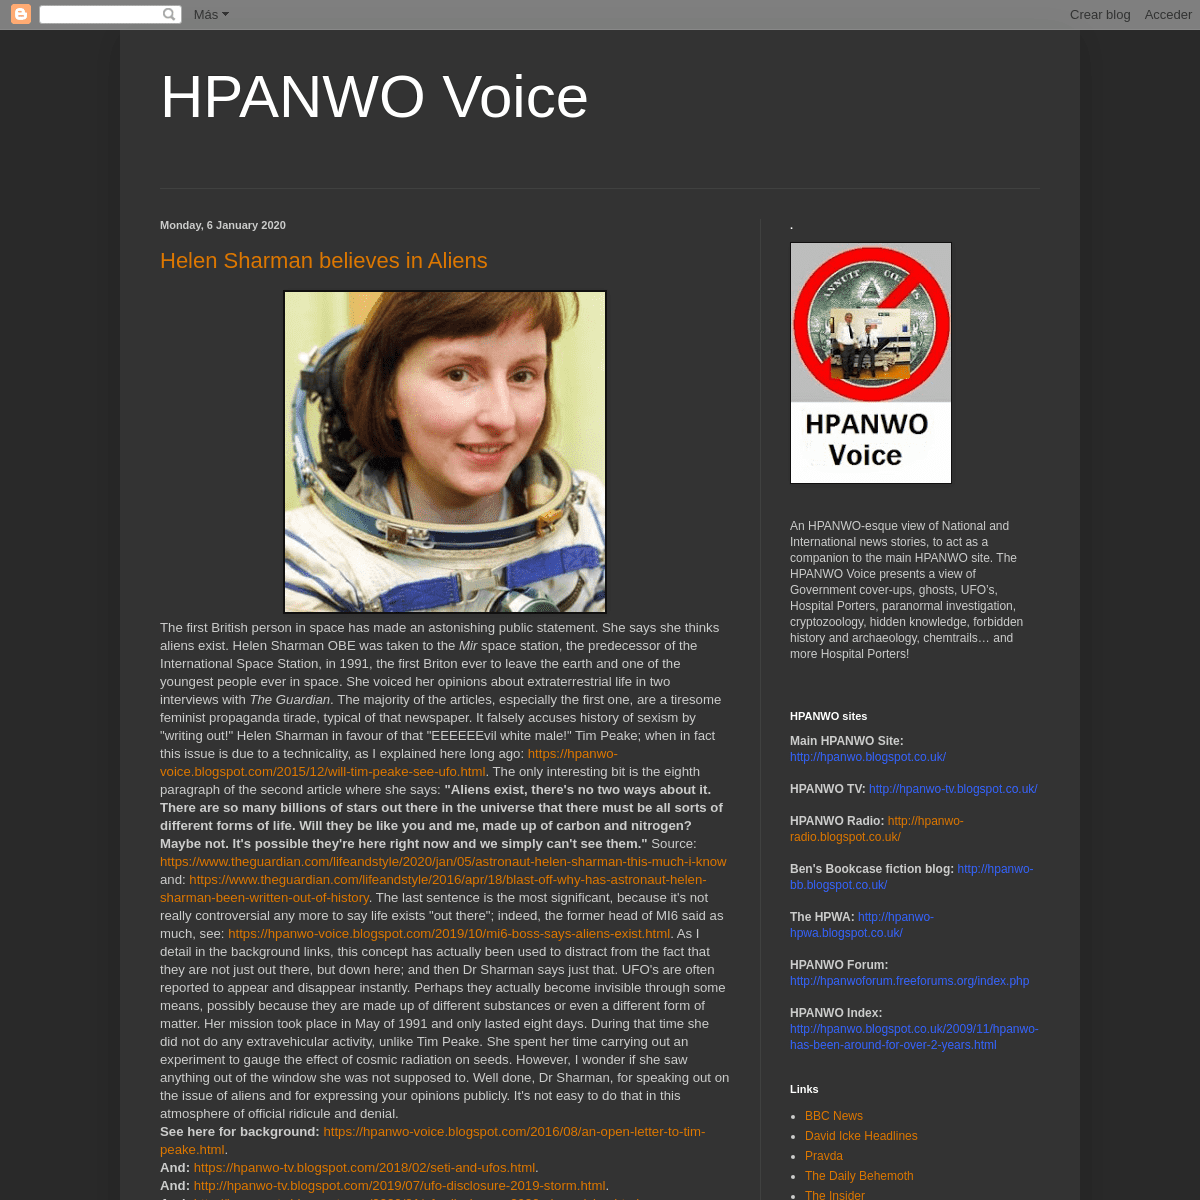 A complete backup of hpanwo-voice.blogspot.com